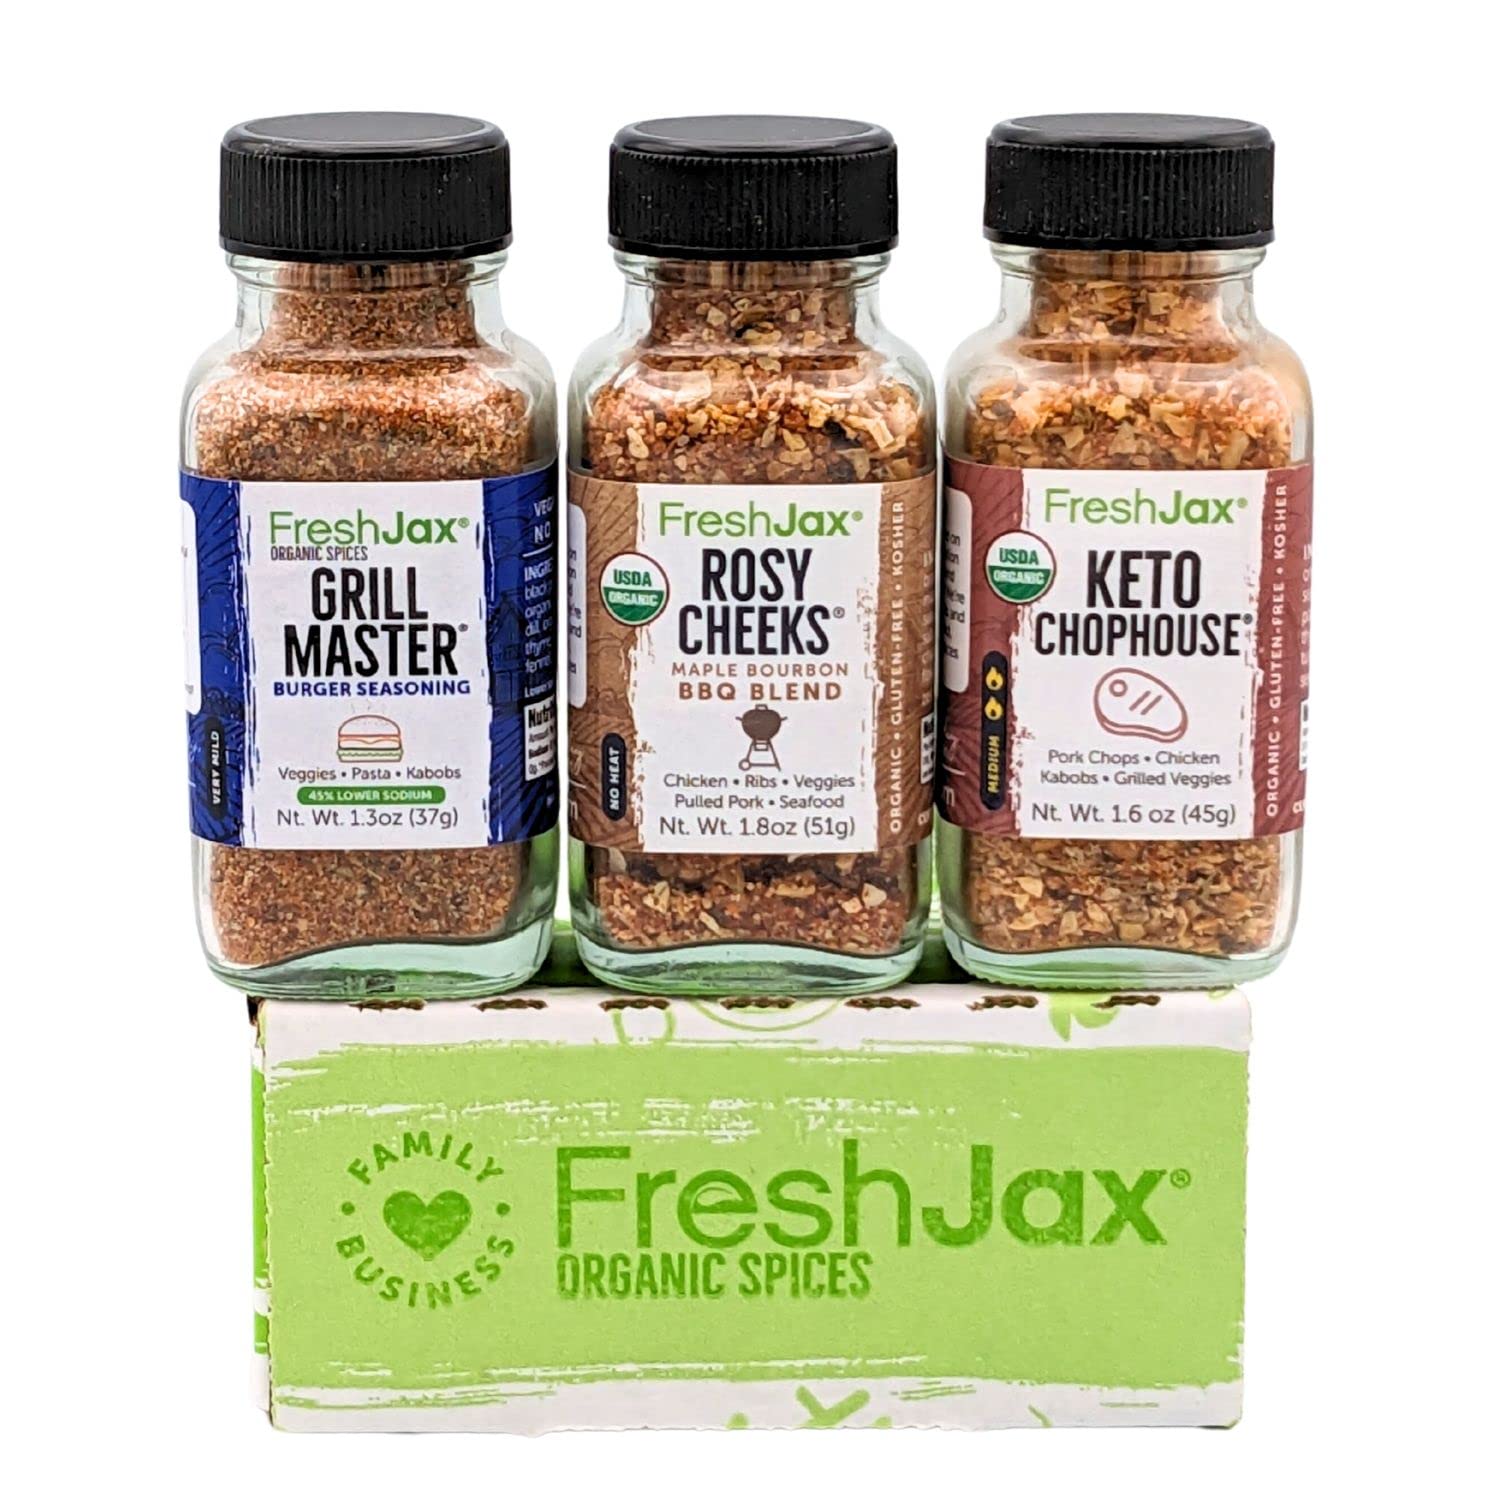 FreshJax Grill and BBQ Seasoning Gift Set | Pack of 3 Organic Grilling Spices | Grilling Gift sets for Men | Grill Master, Keto Chophouse & Rosy Cheeks-Maple Bourbon | Spices and Seasoning Sets